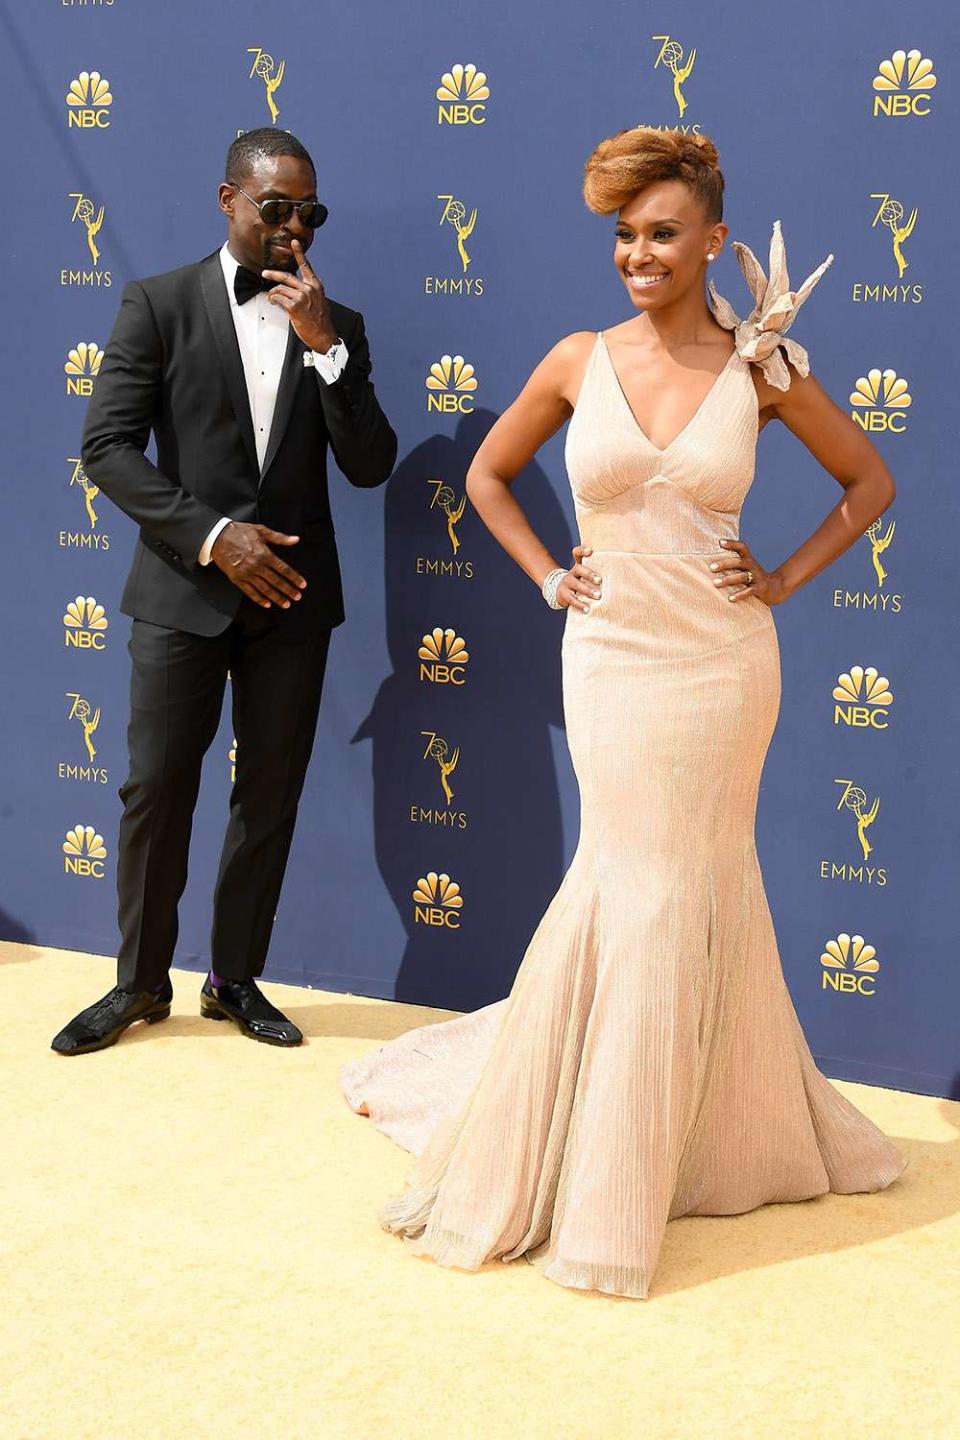 LOS ANGELES, CA - SEPTEMBER 17: Sterling K. Brown (L) and Ryan Michelle Bathe attend the 70th Emmy Awards at Microsoft Theater on September 17, 2018 in Los Angeles, California. (Photo by Steve Granitz/WireImage,)